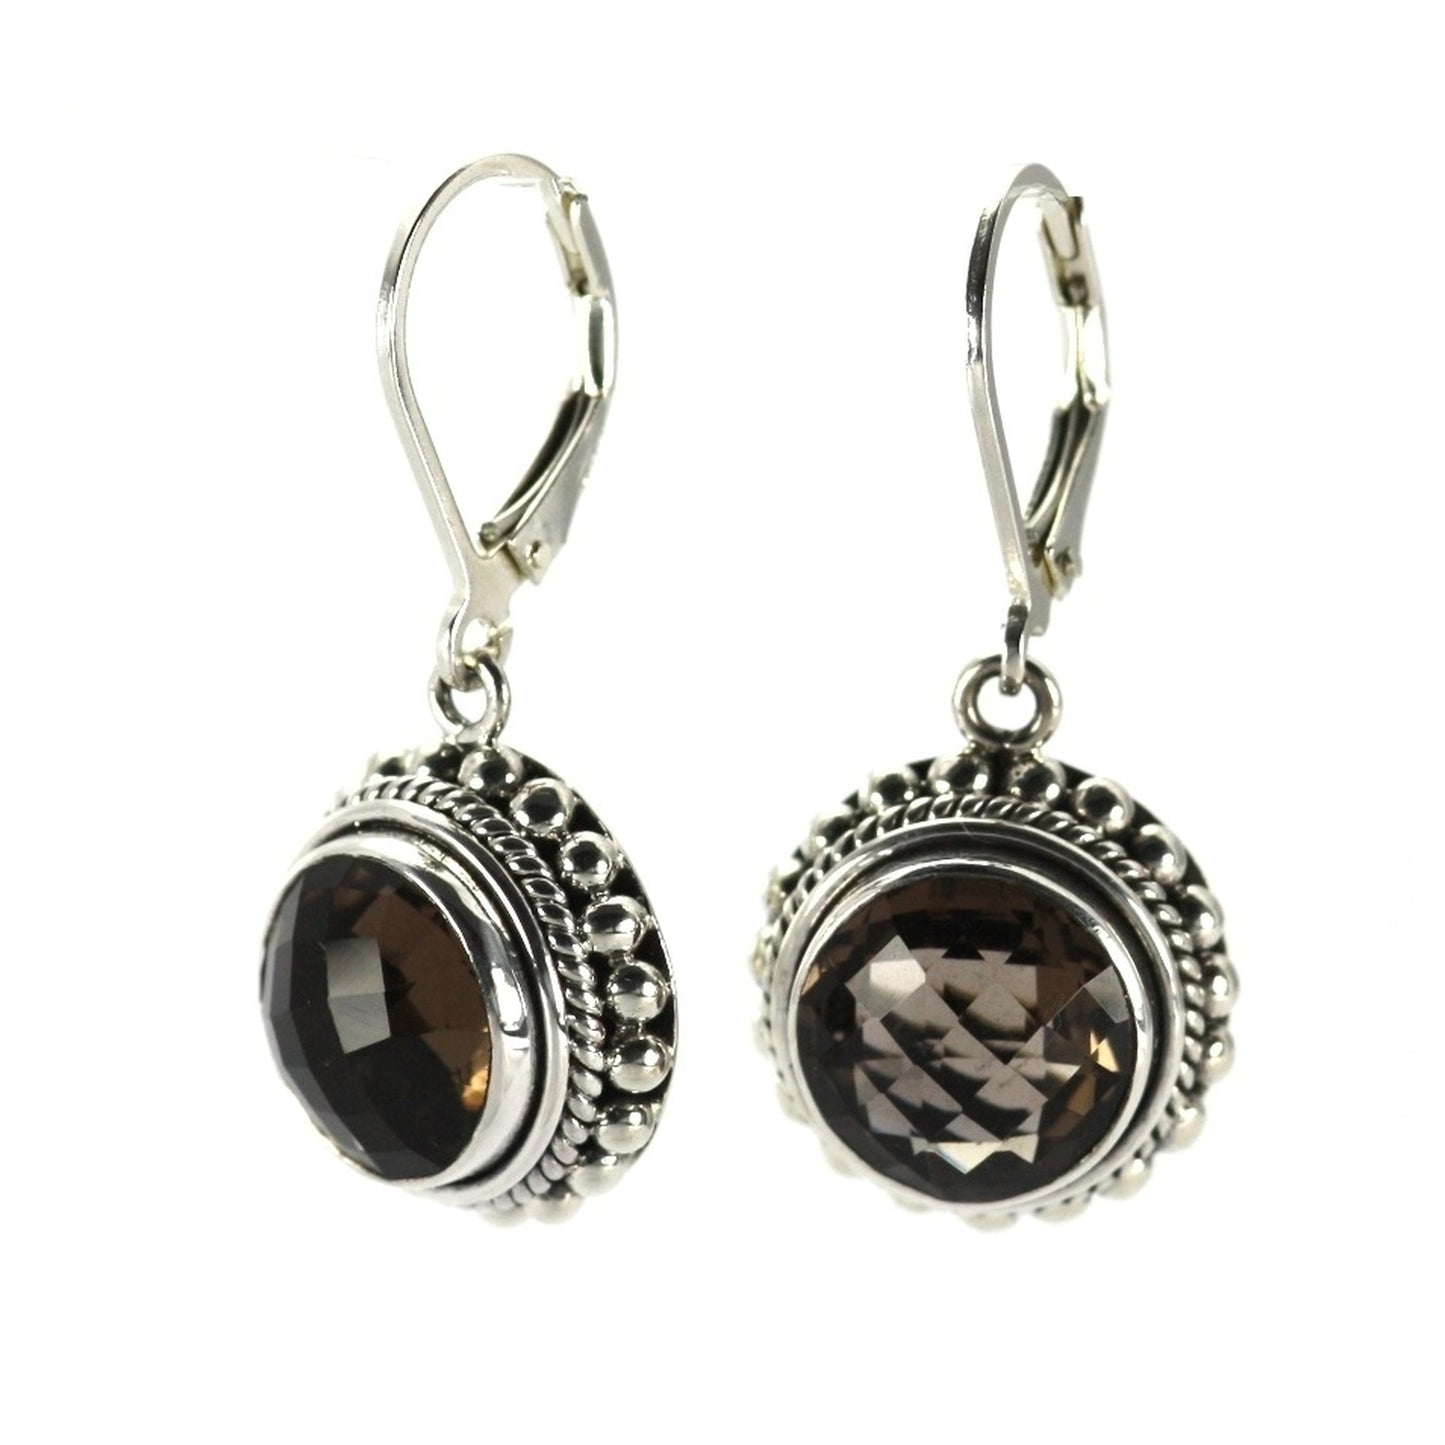 Silver earrings with round faceted smoky quartz gemstones.